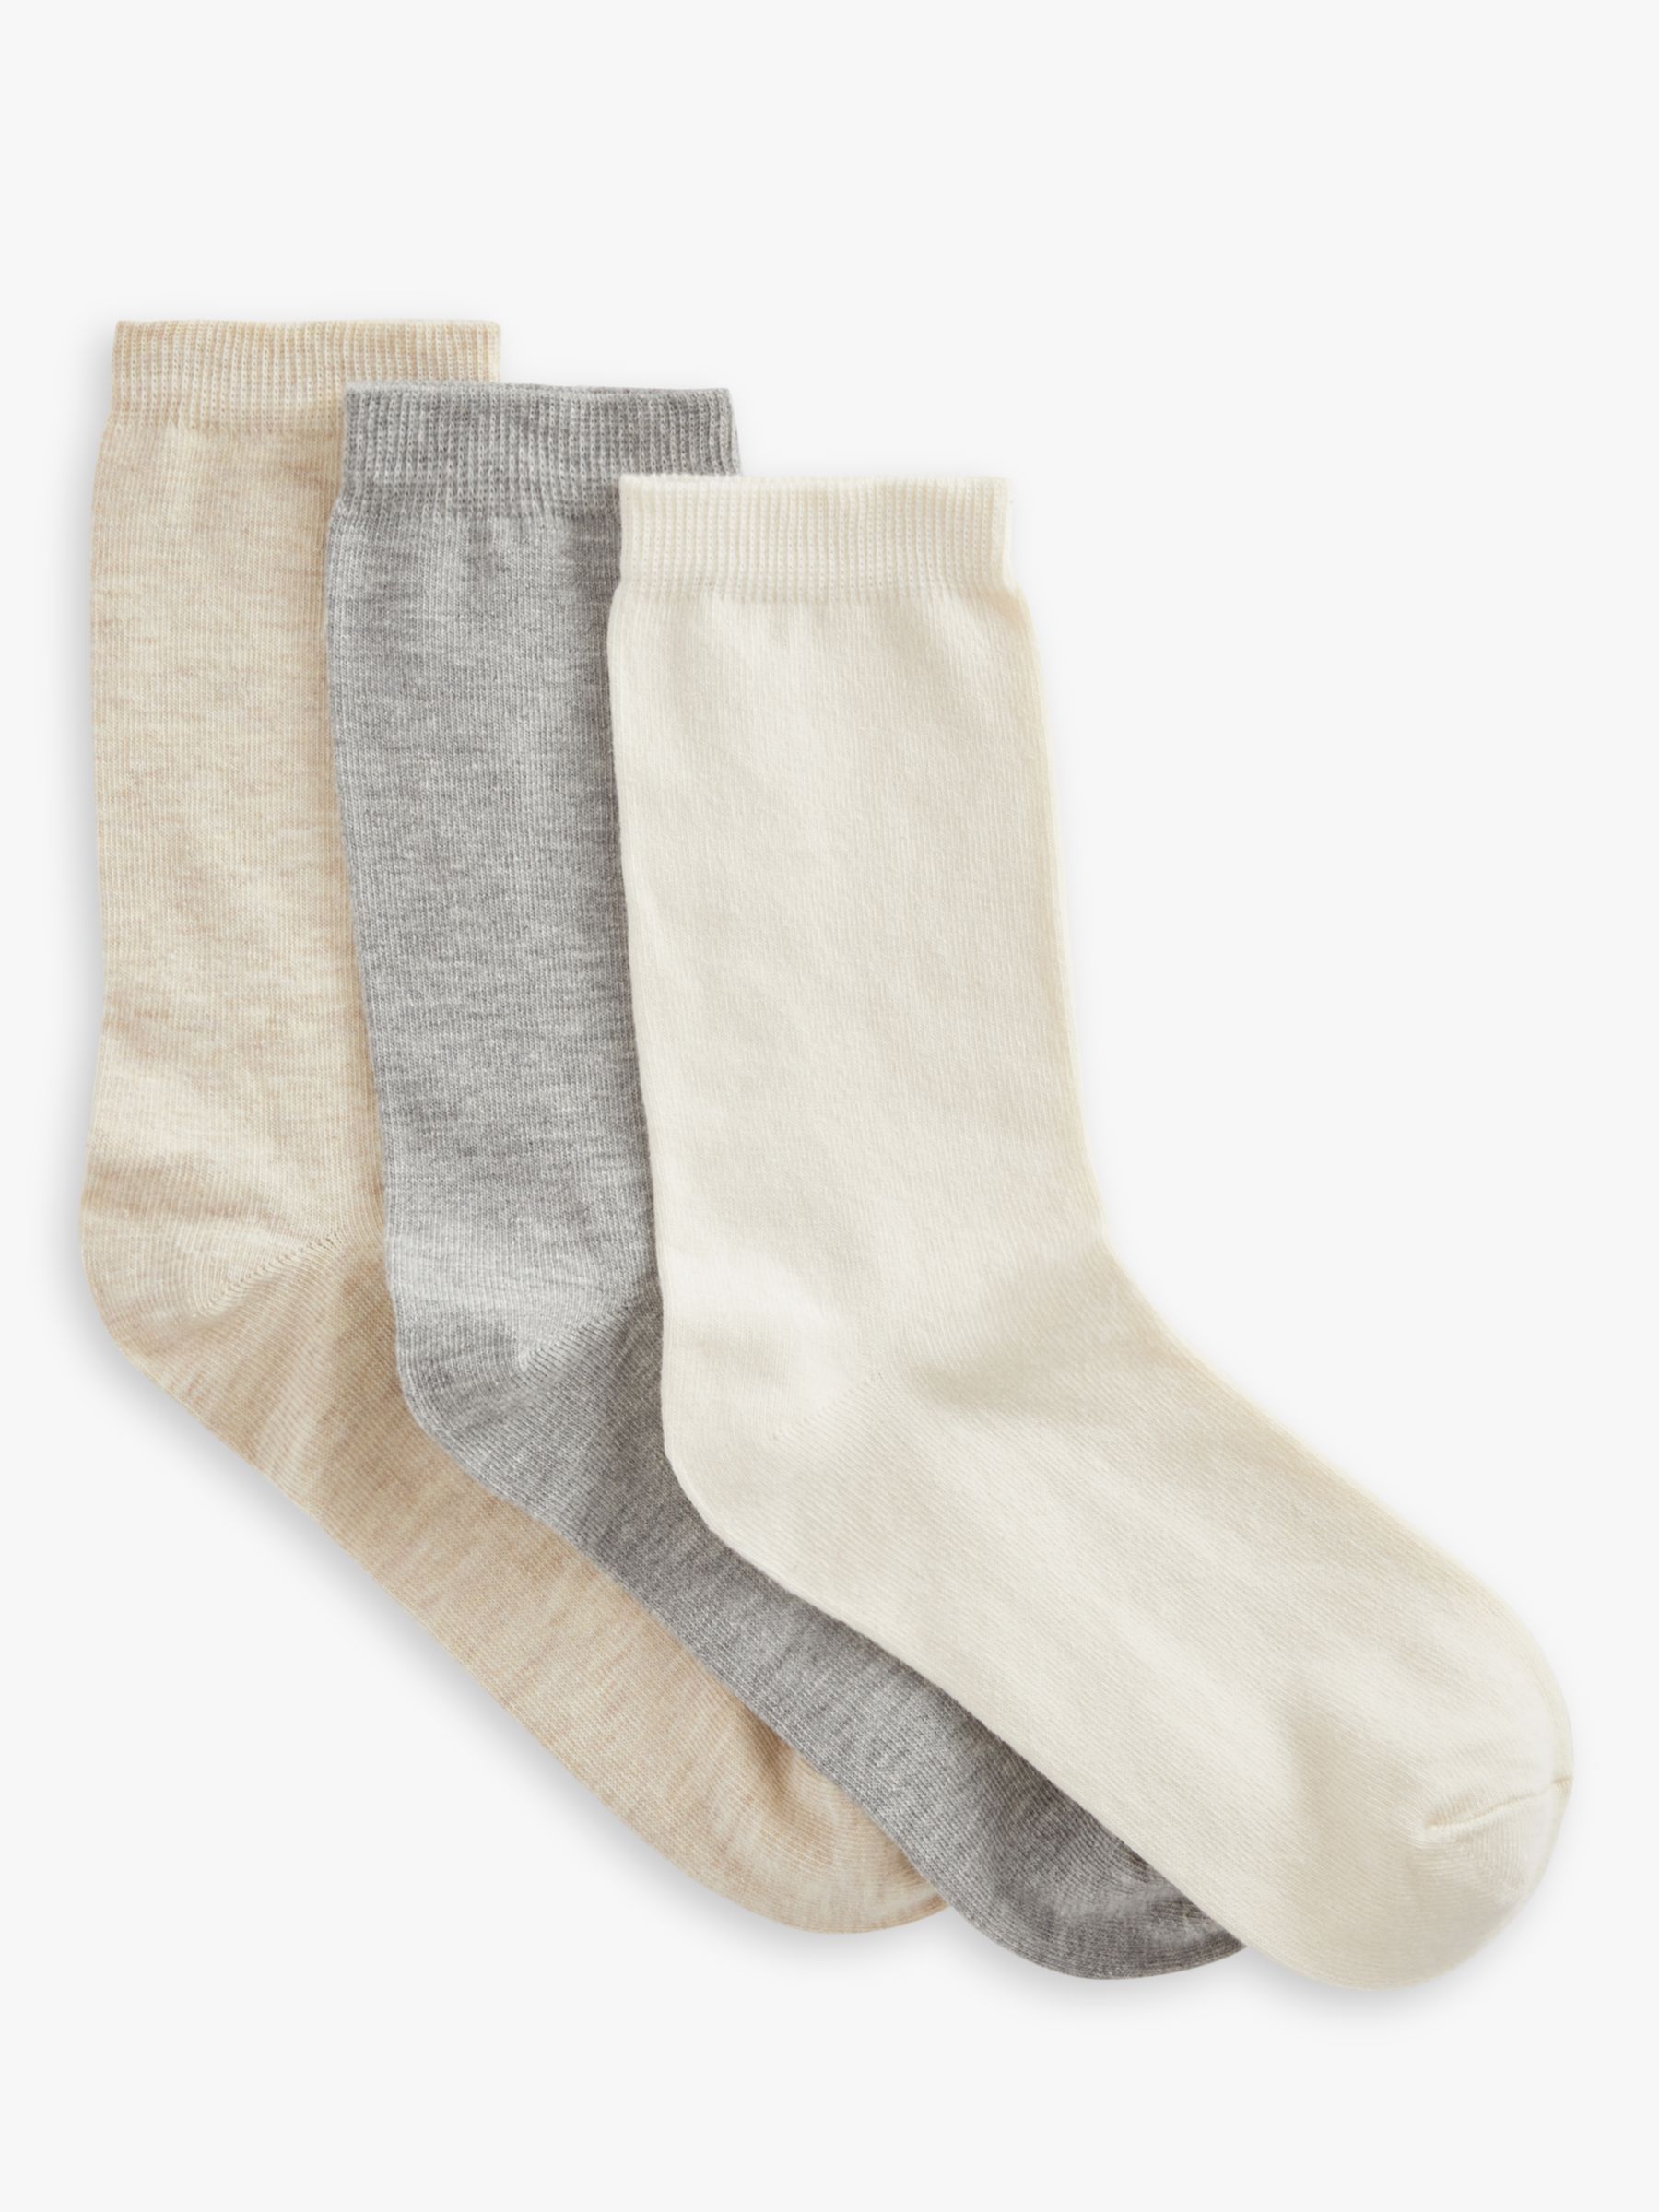 John Lewis Organic Cotton Mix Ankle Socks, Pack of 3, Neutrals, One Size